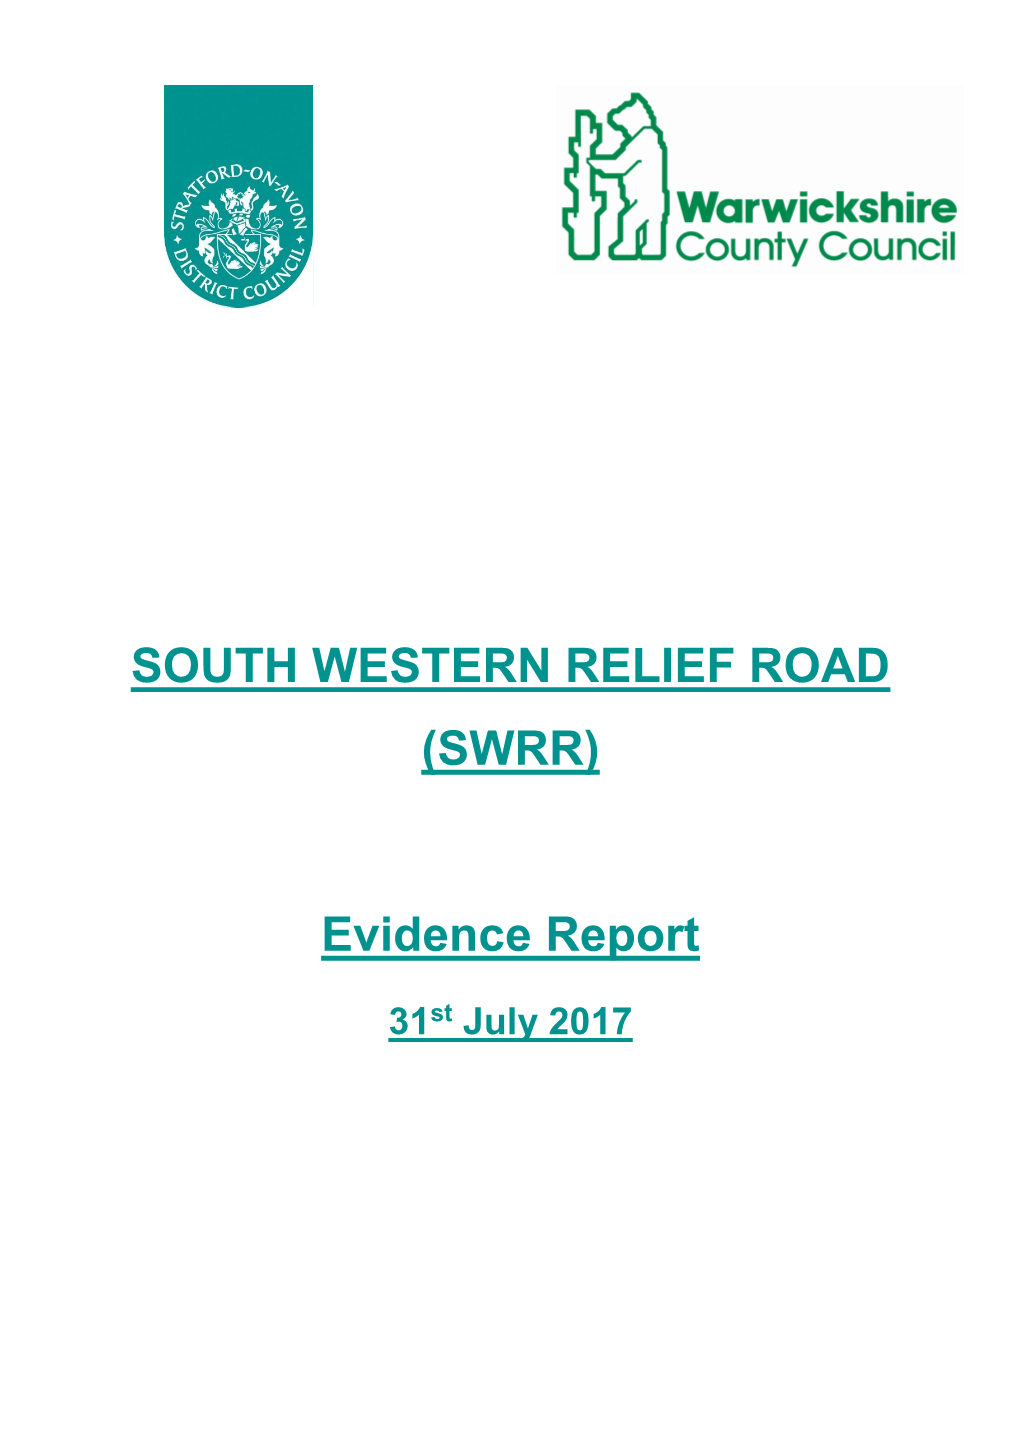 SOUTH WESTERN RELIEF ROAD (SWRR) Evidence Report